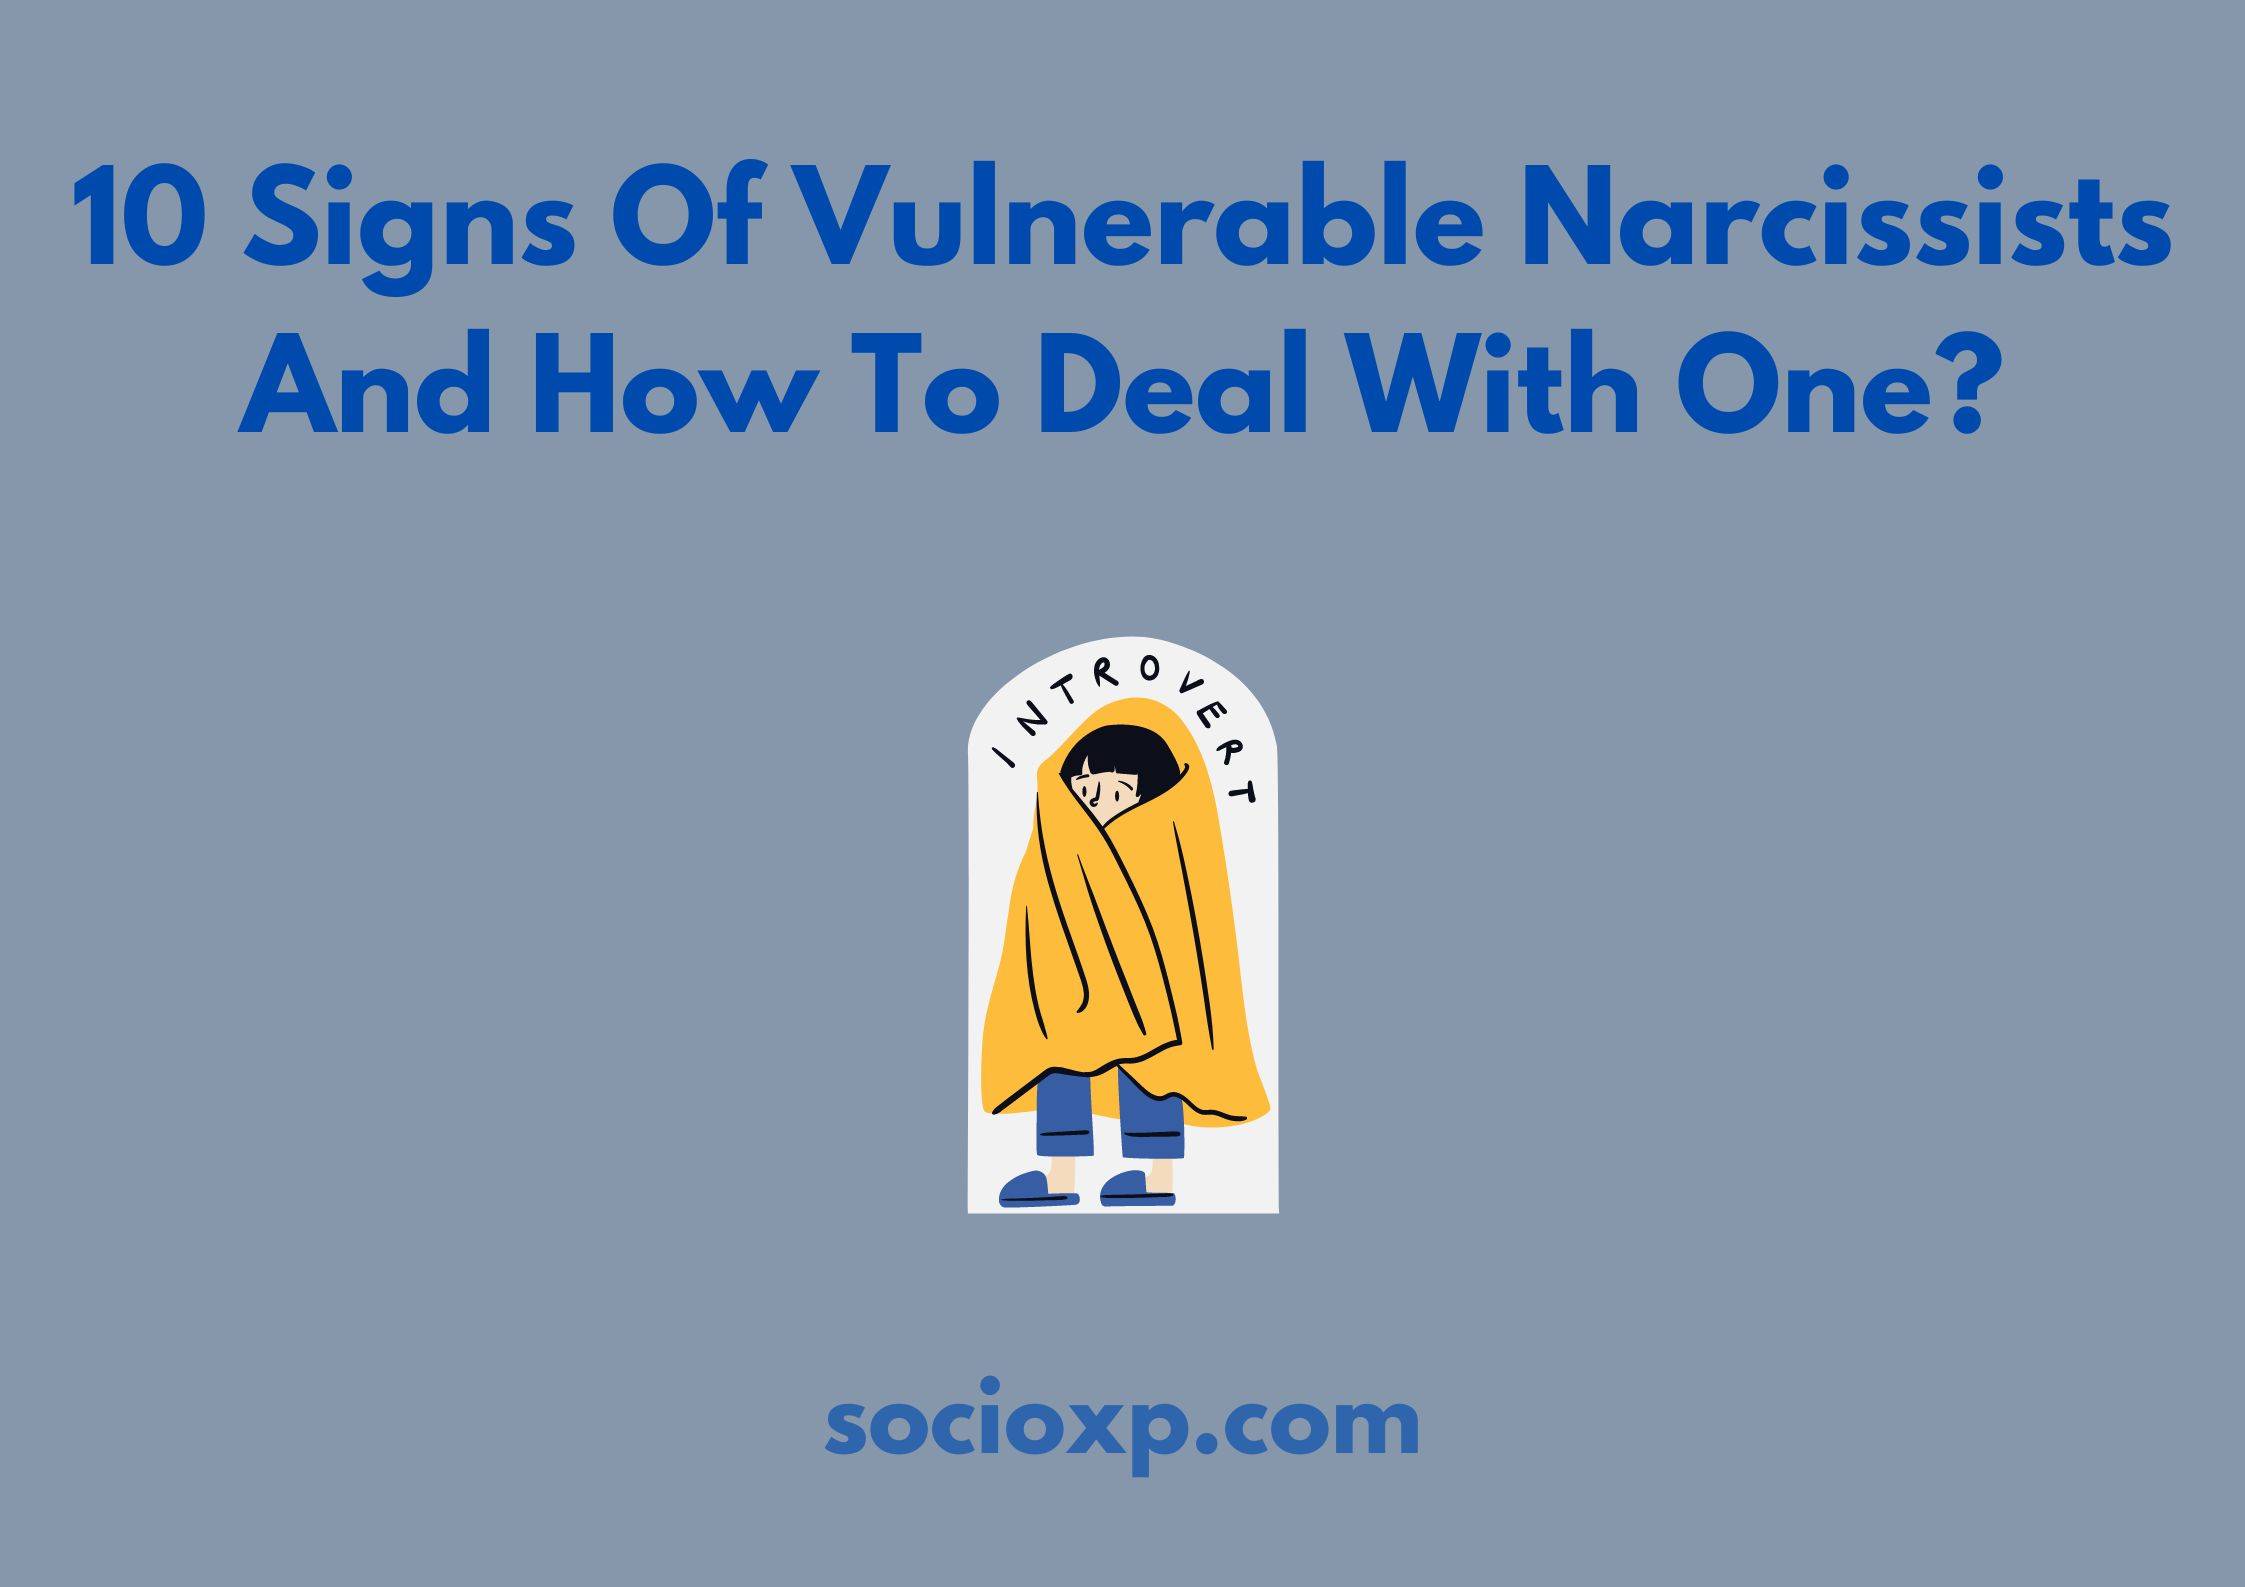 10 Signs Of Vulnerable Narcissists And How To Deal With One?